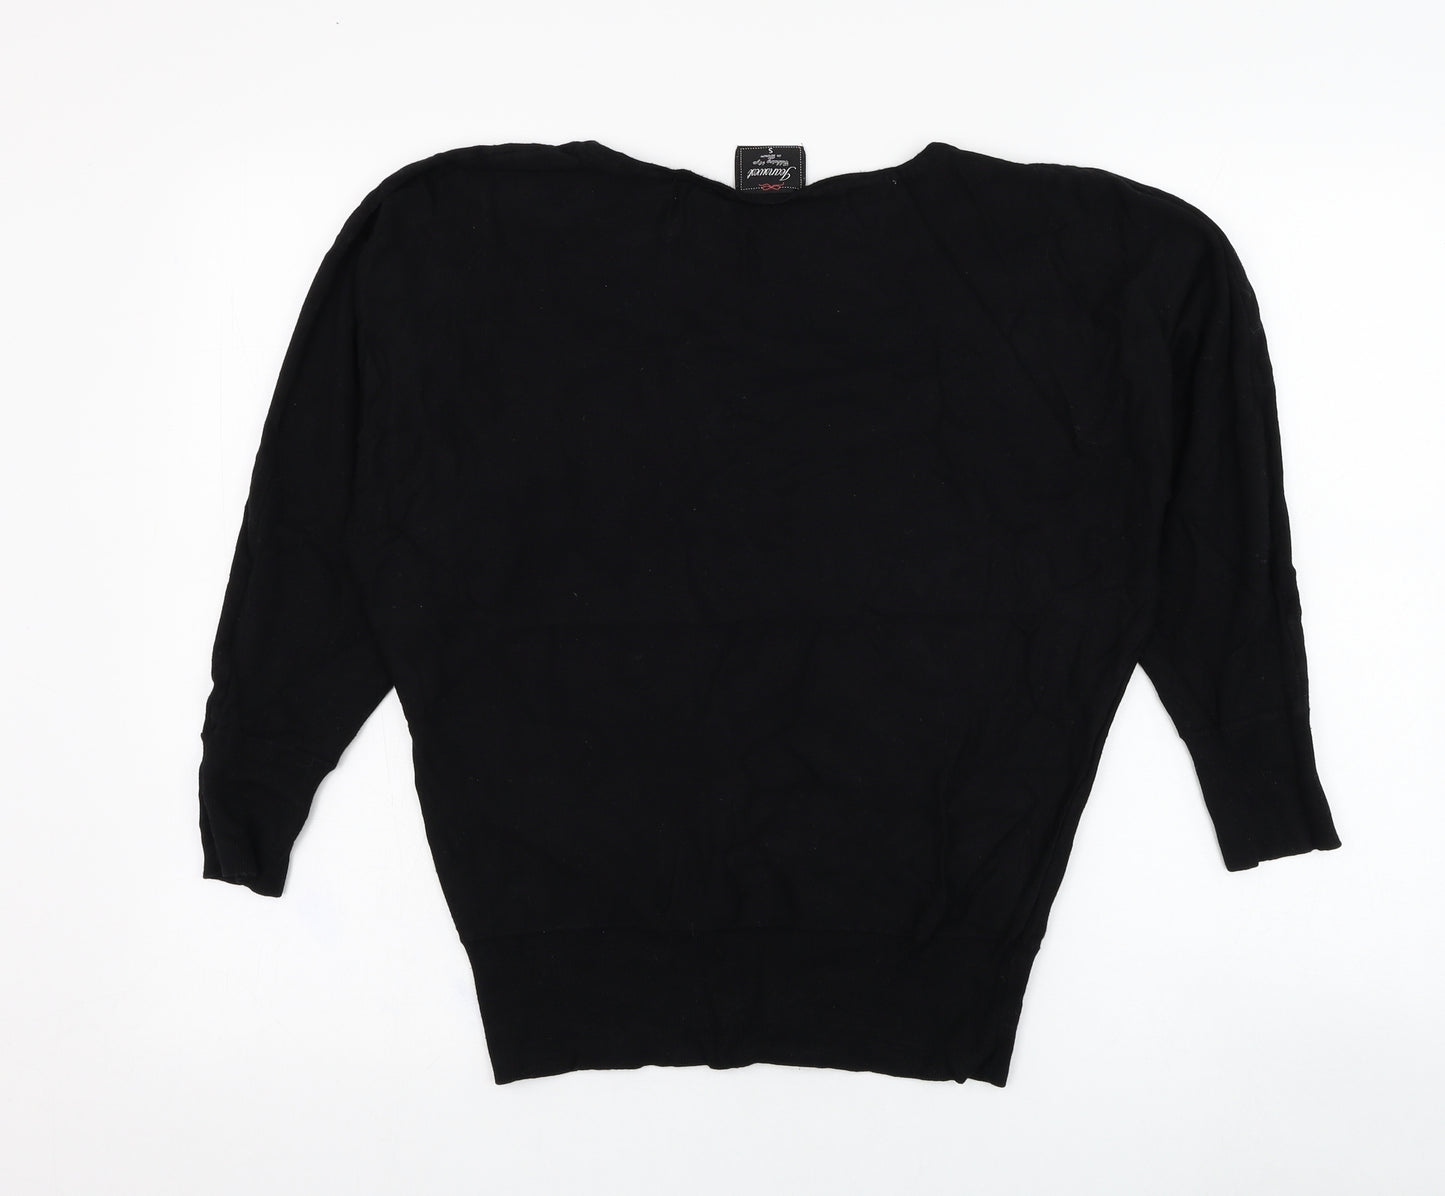 Jeanswest Womens Black Round Neck  Rayon Pullover Jumper Size S